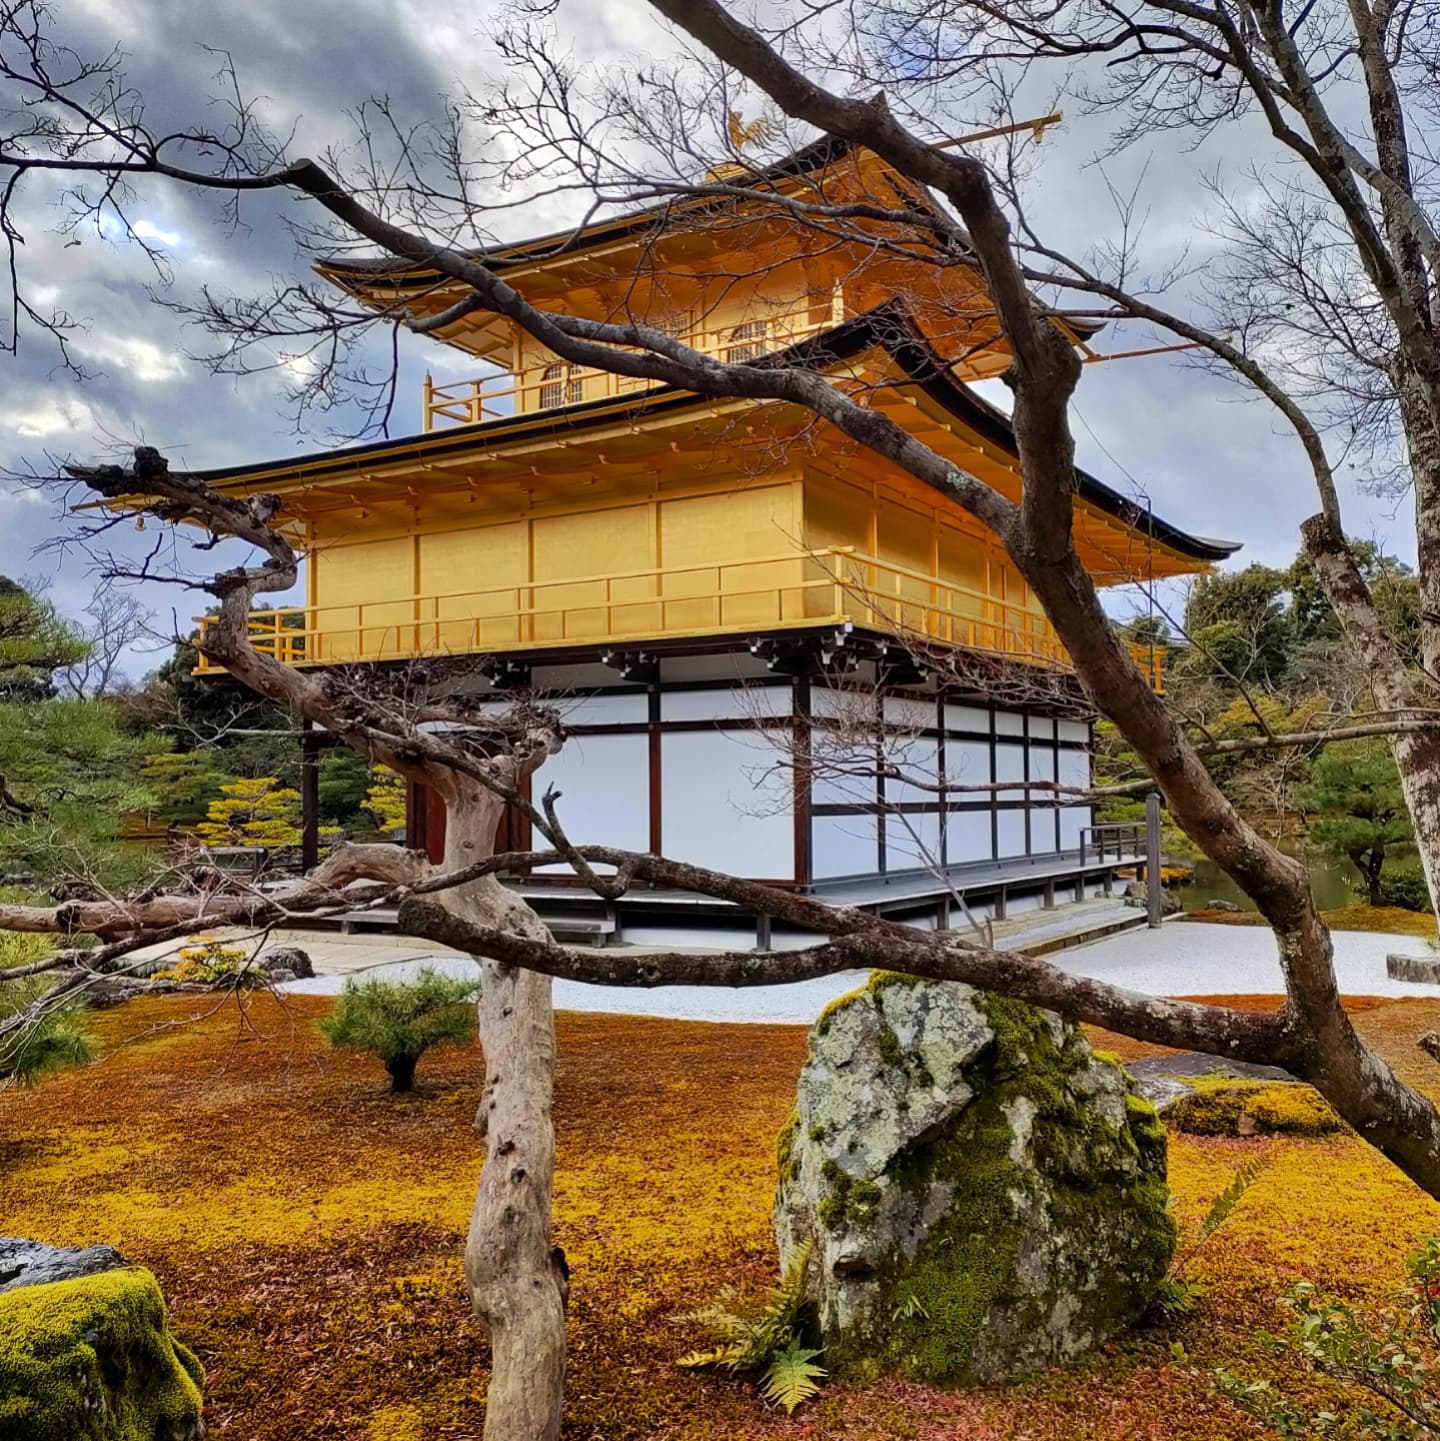 The Kinkaku-ji temple (known as the Golden Pavilion) is one of the most beautiful and is also a World Heritage Site